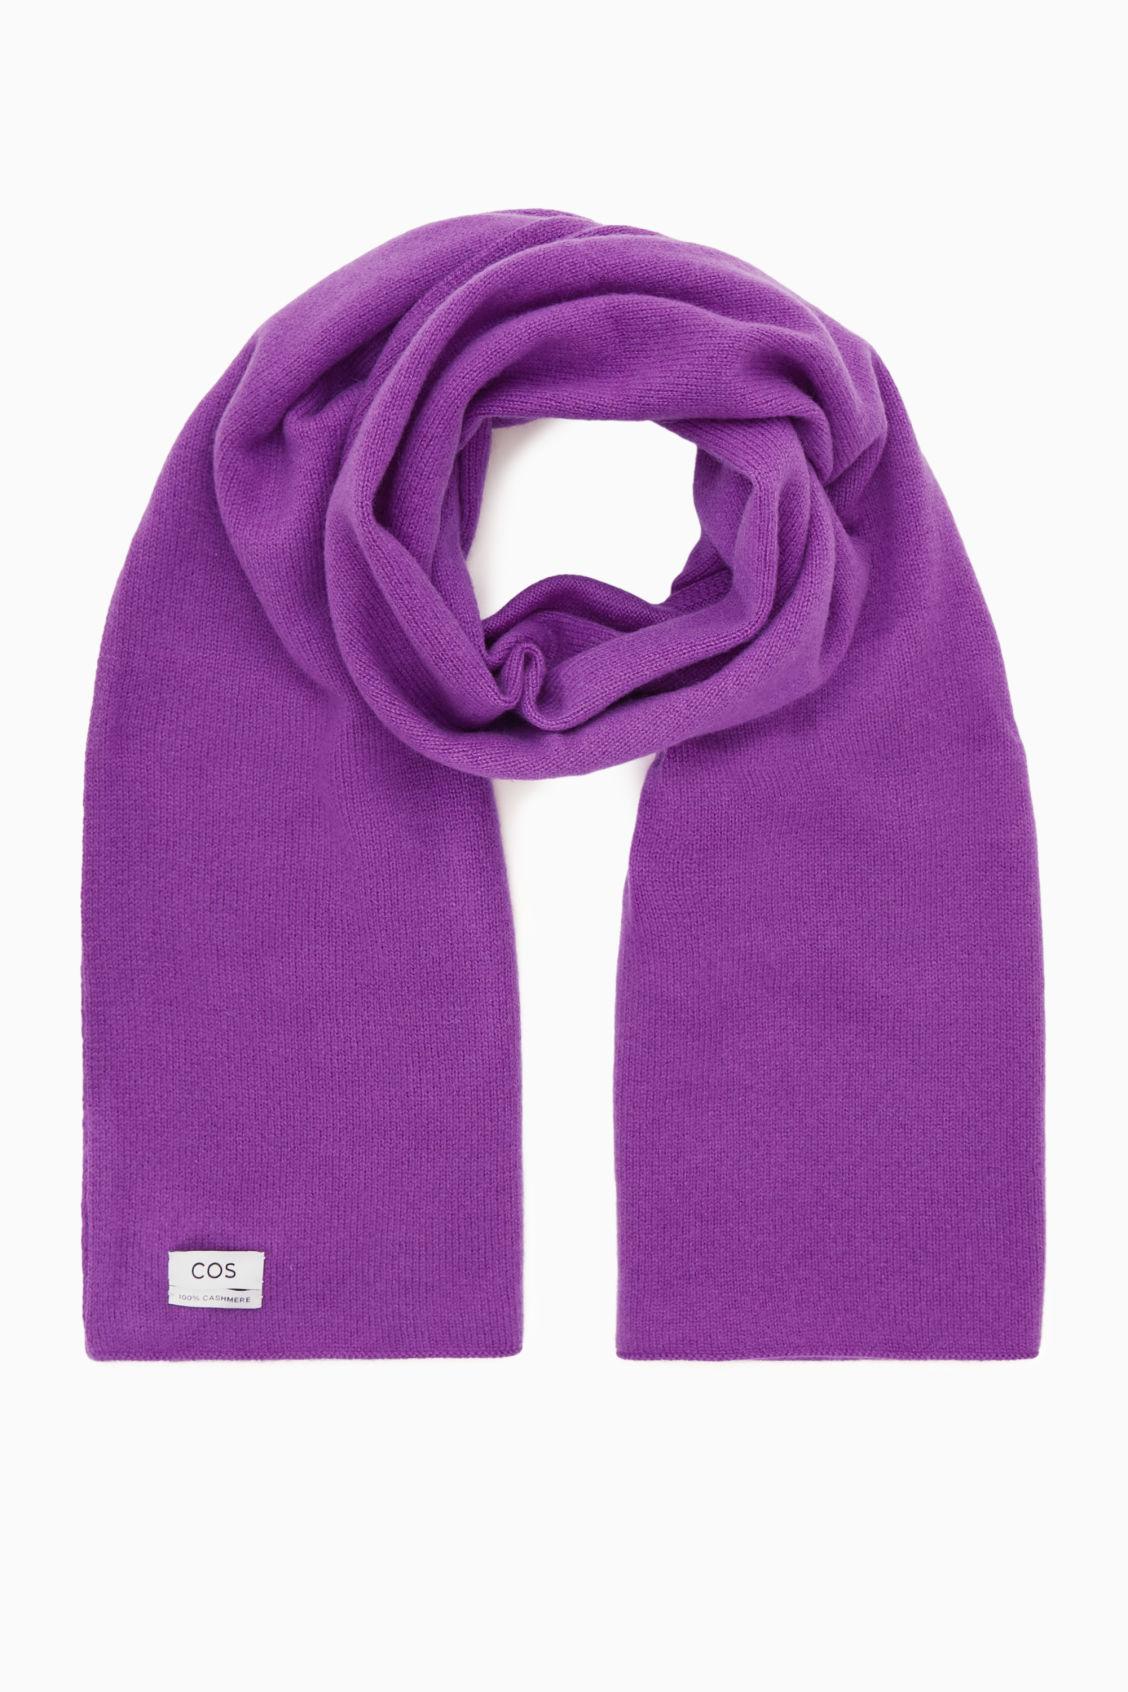 COS Pure Cashmere Scarf in Purple | Lyst